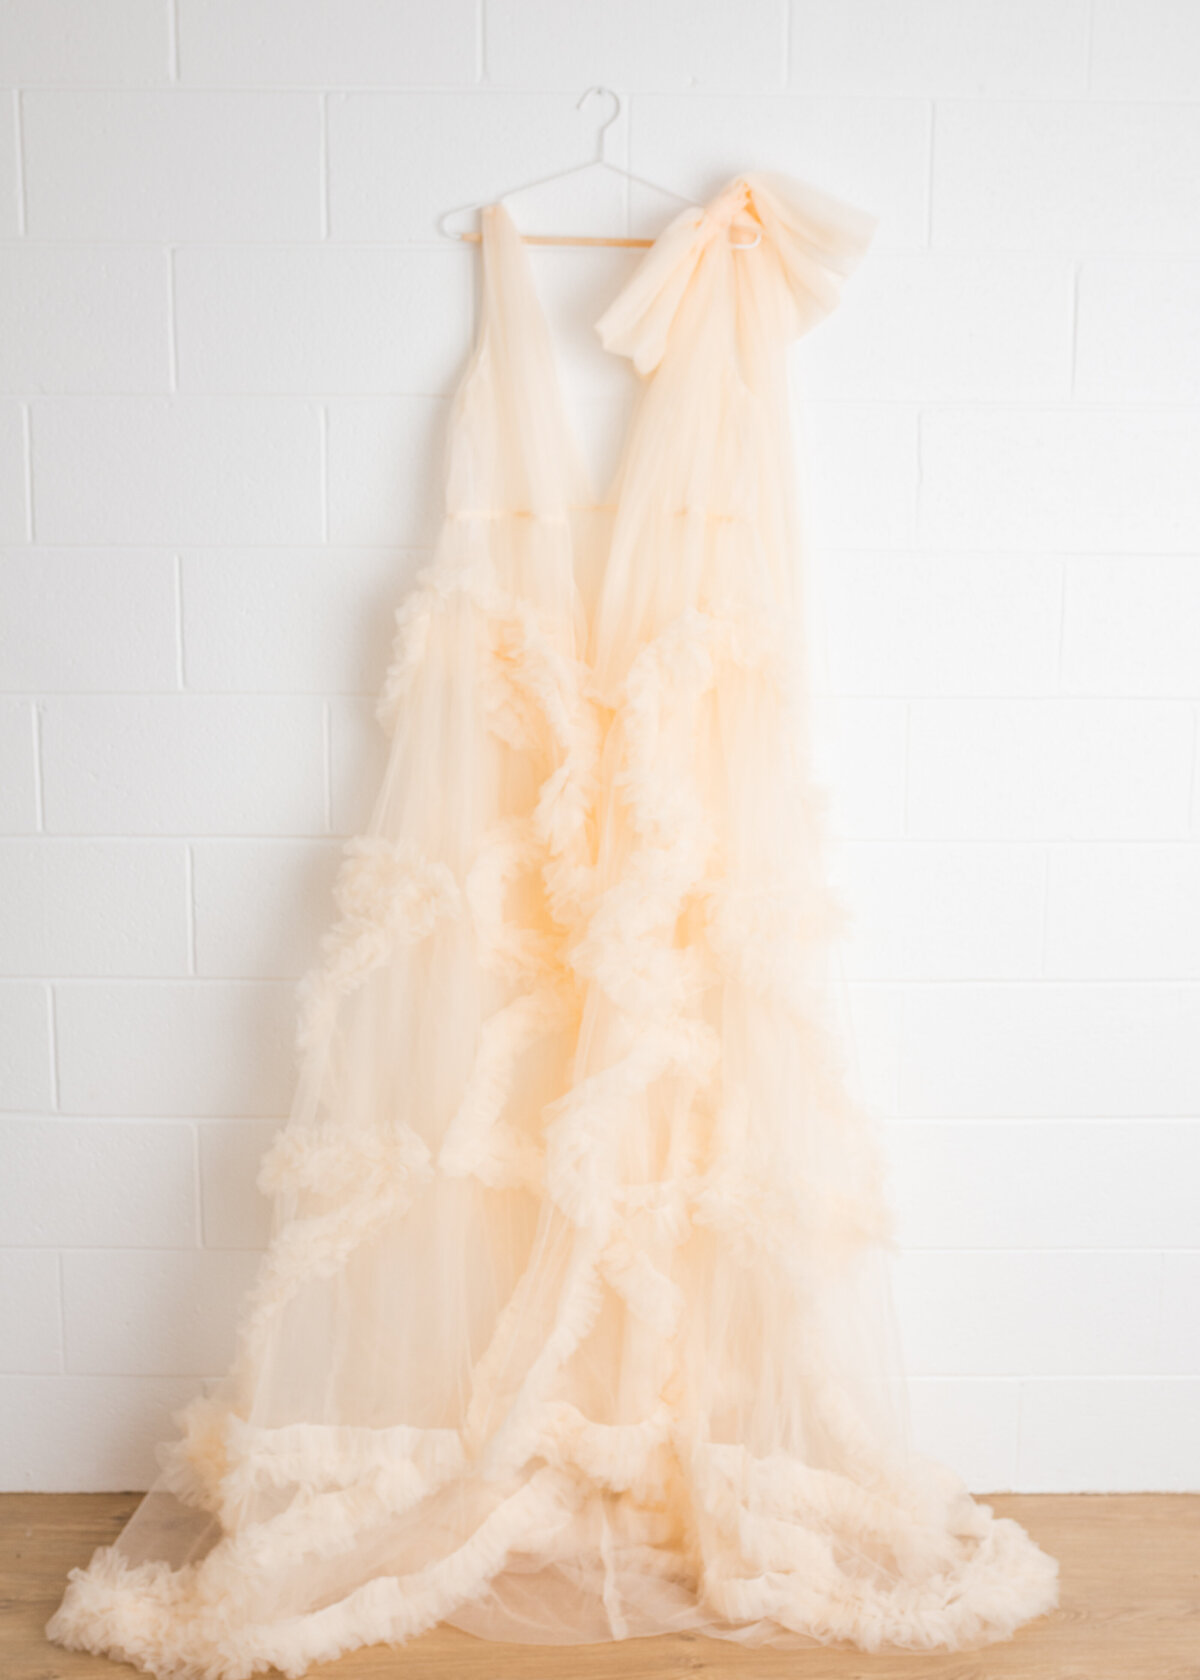 Couture Sheer and Tulle Gown in Peach | Client wardrobe image by Lauren Vanier Photography